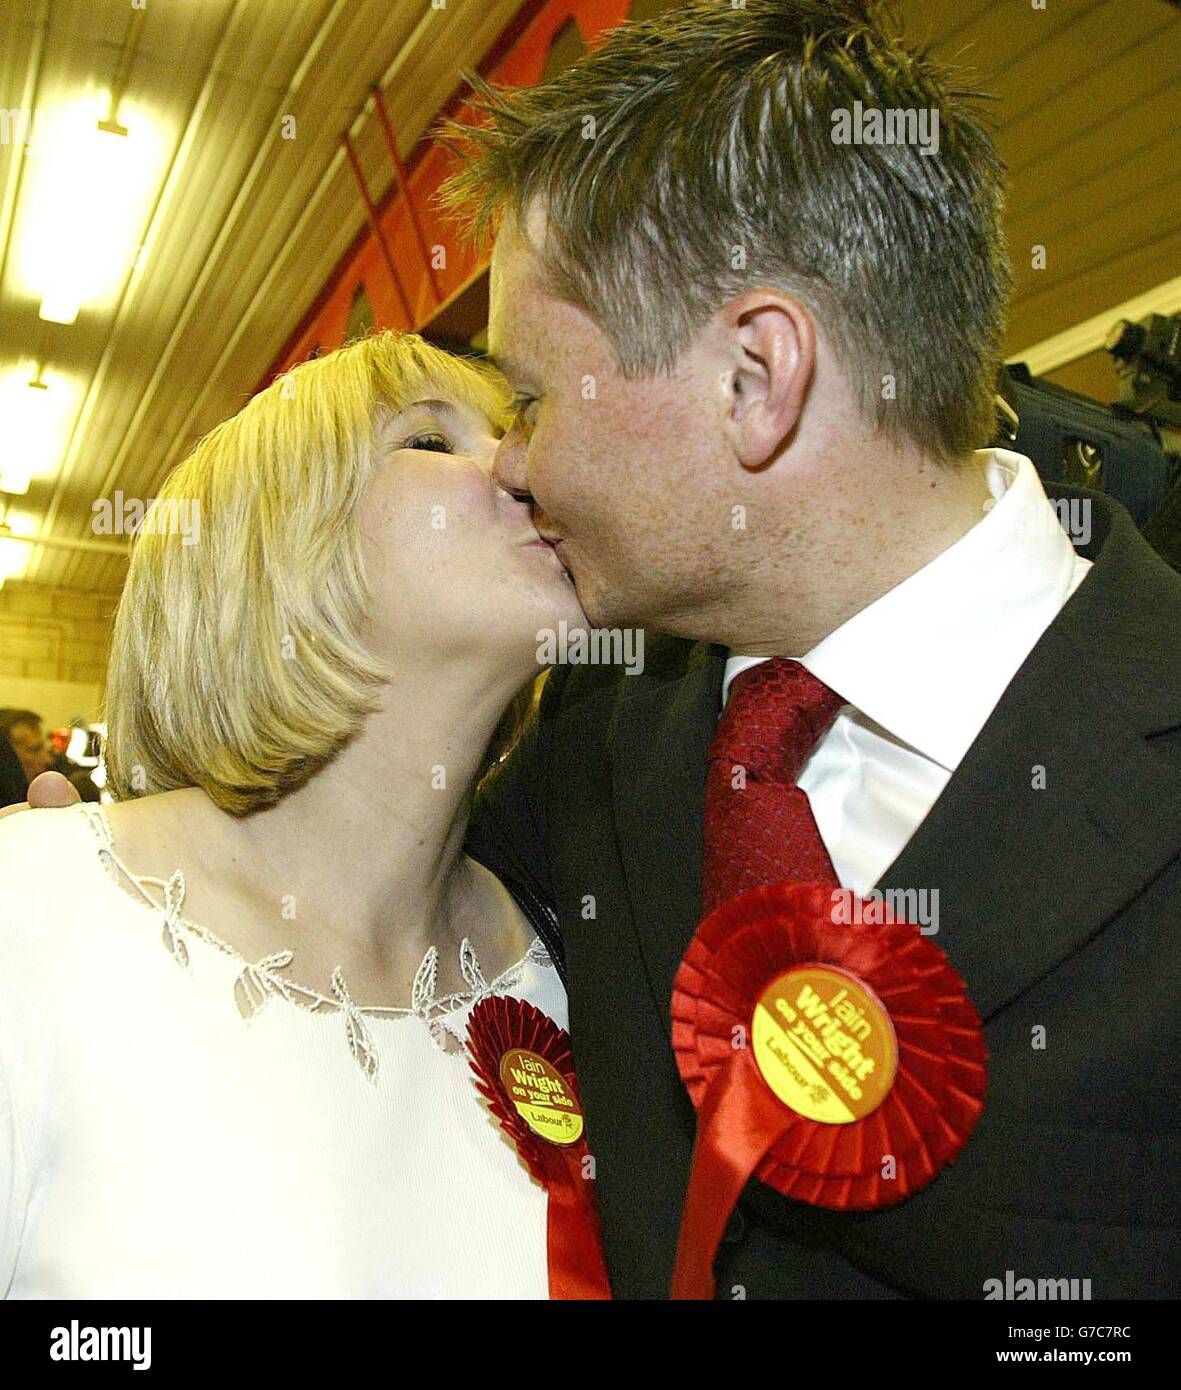 Victorious Labour candidate Iain Wright celebrates with wife Tiffiny after winning the Hartlepool by-election by some 2,000 voters from Liberal Democrat Jody Dunn, who ran him close second. The UKIP candidate Stephen Allison finished in third place while the Conservative candidate Jeremy Middleton finished in fourth. The seat became vacant when former Cabinet Minister Peter Mandelson resigned to become a European Commissioner. Stock Photo